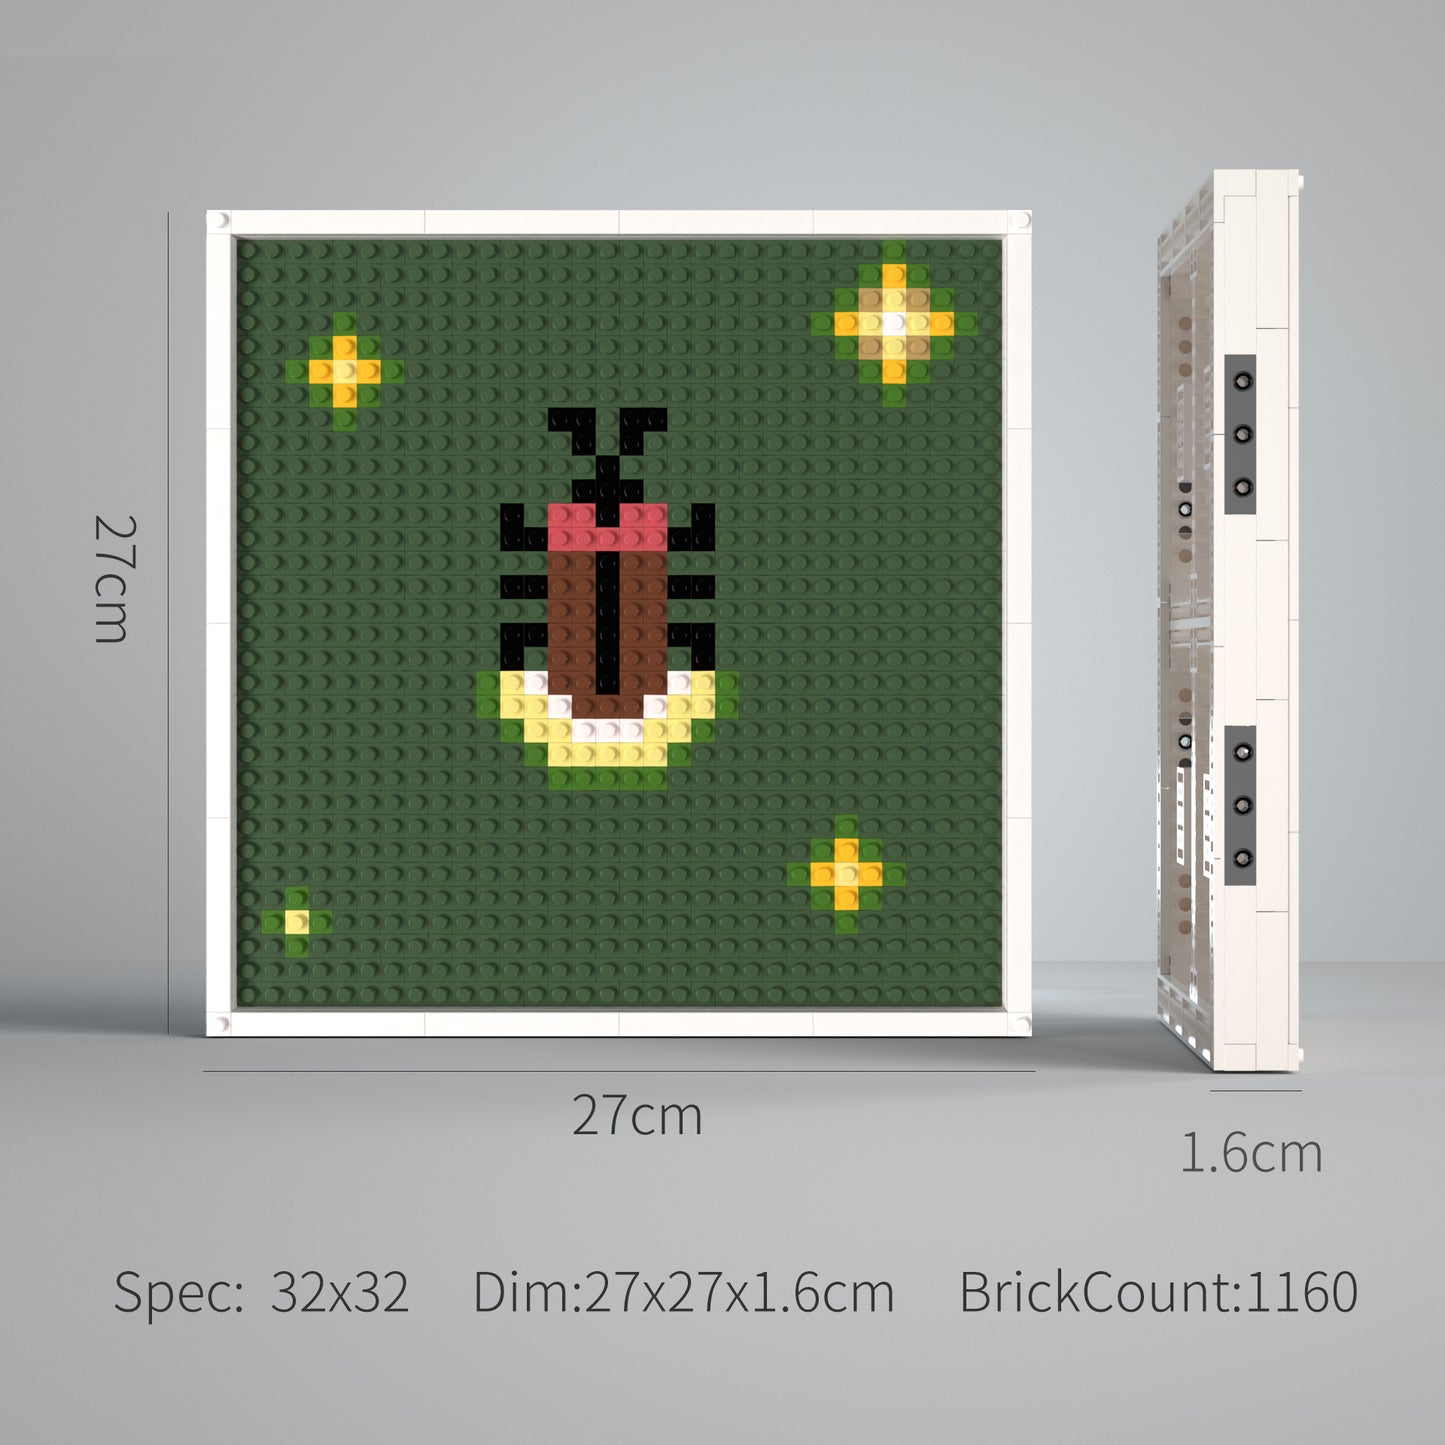 A Pixel Art of “Firefly” Made of 32*32 Compatible Lego Bricks